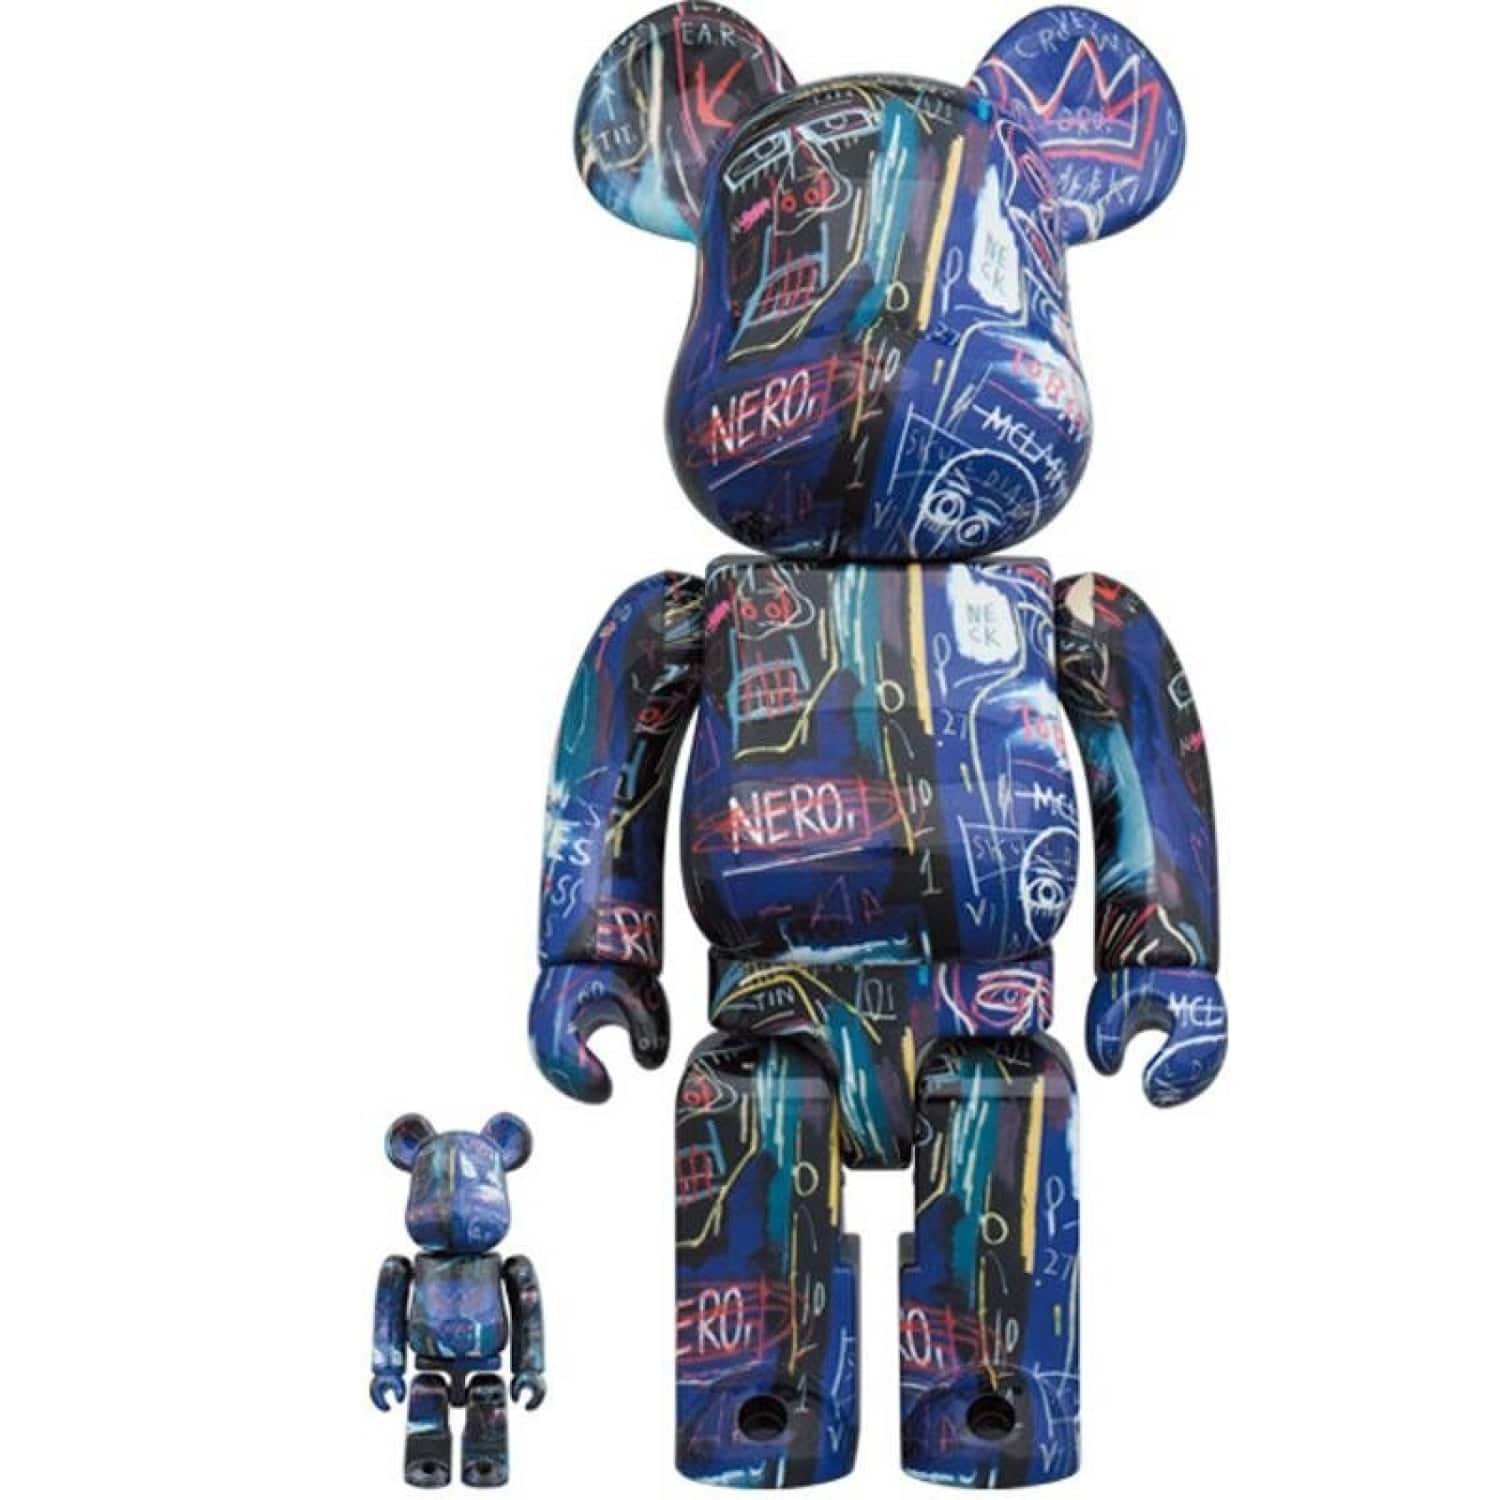 “Basquiat” from Be@rbrick - Dope! Gallery